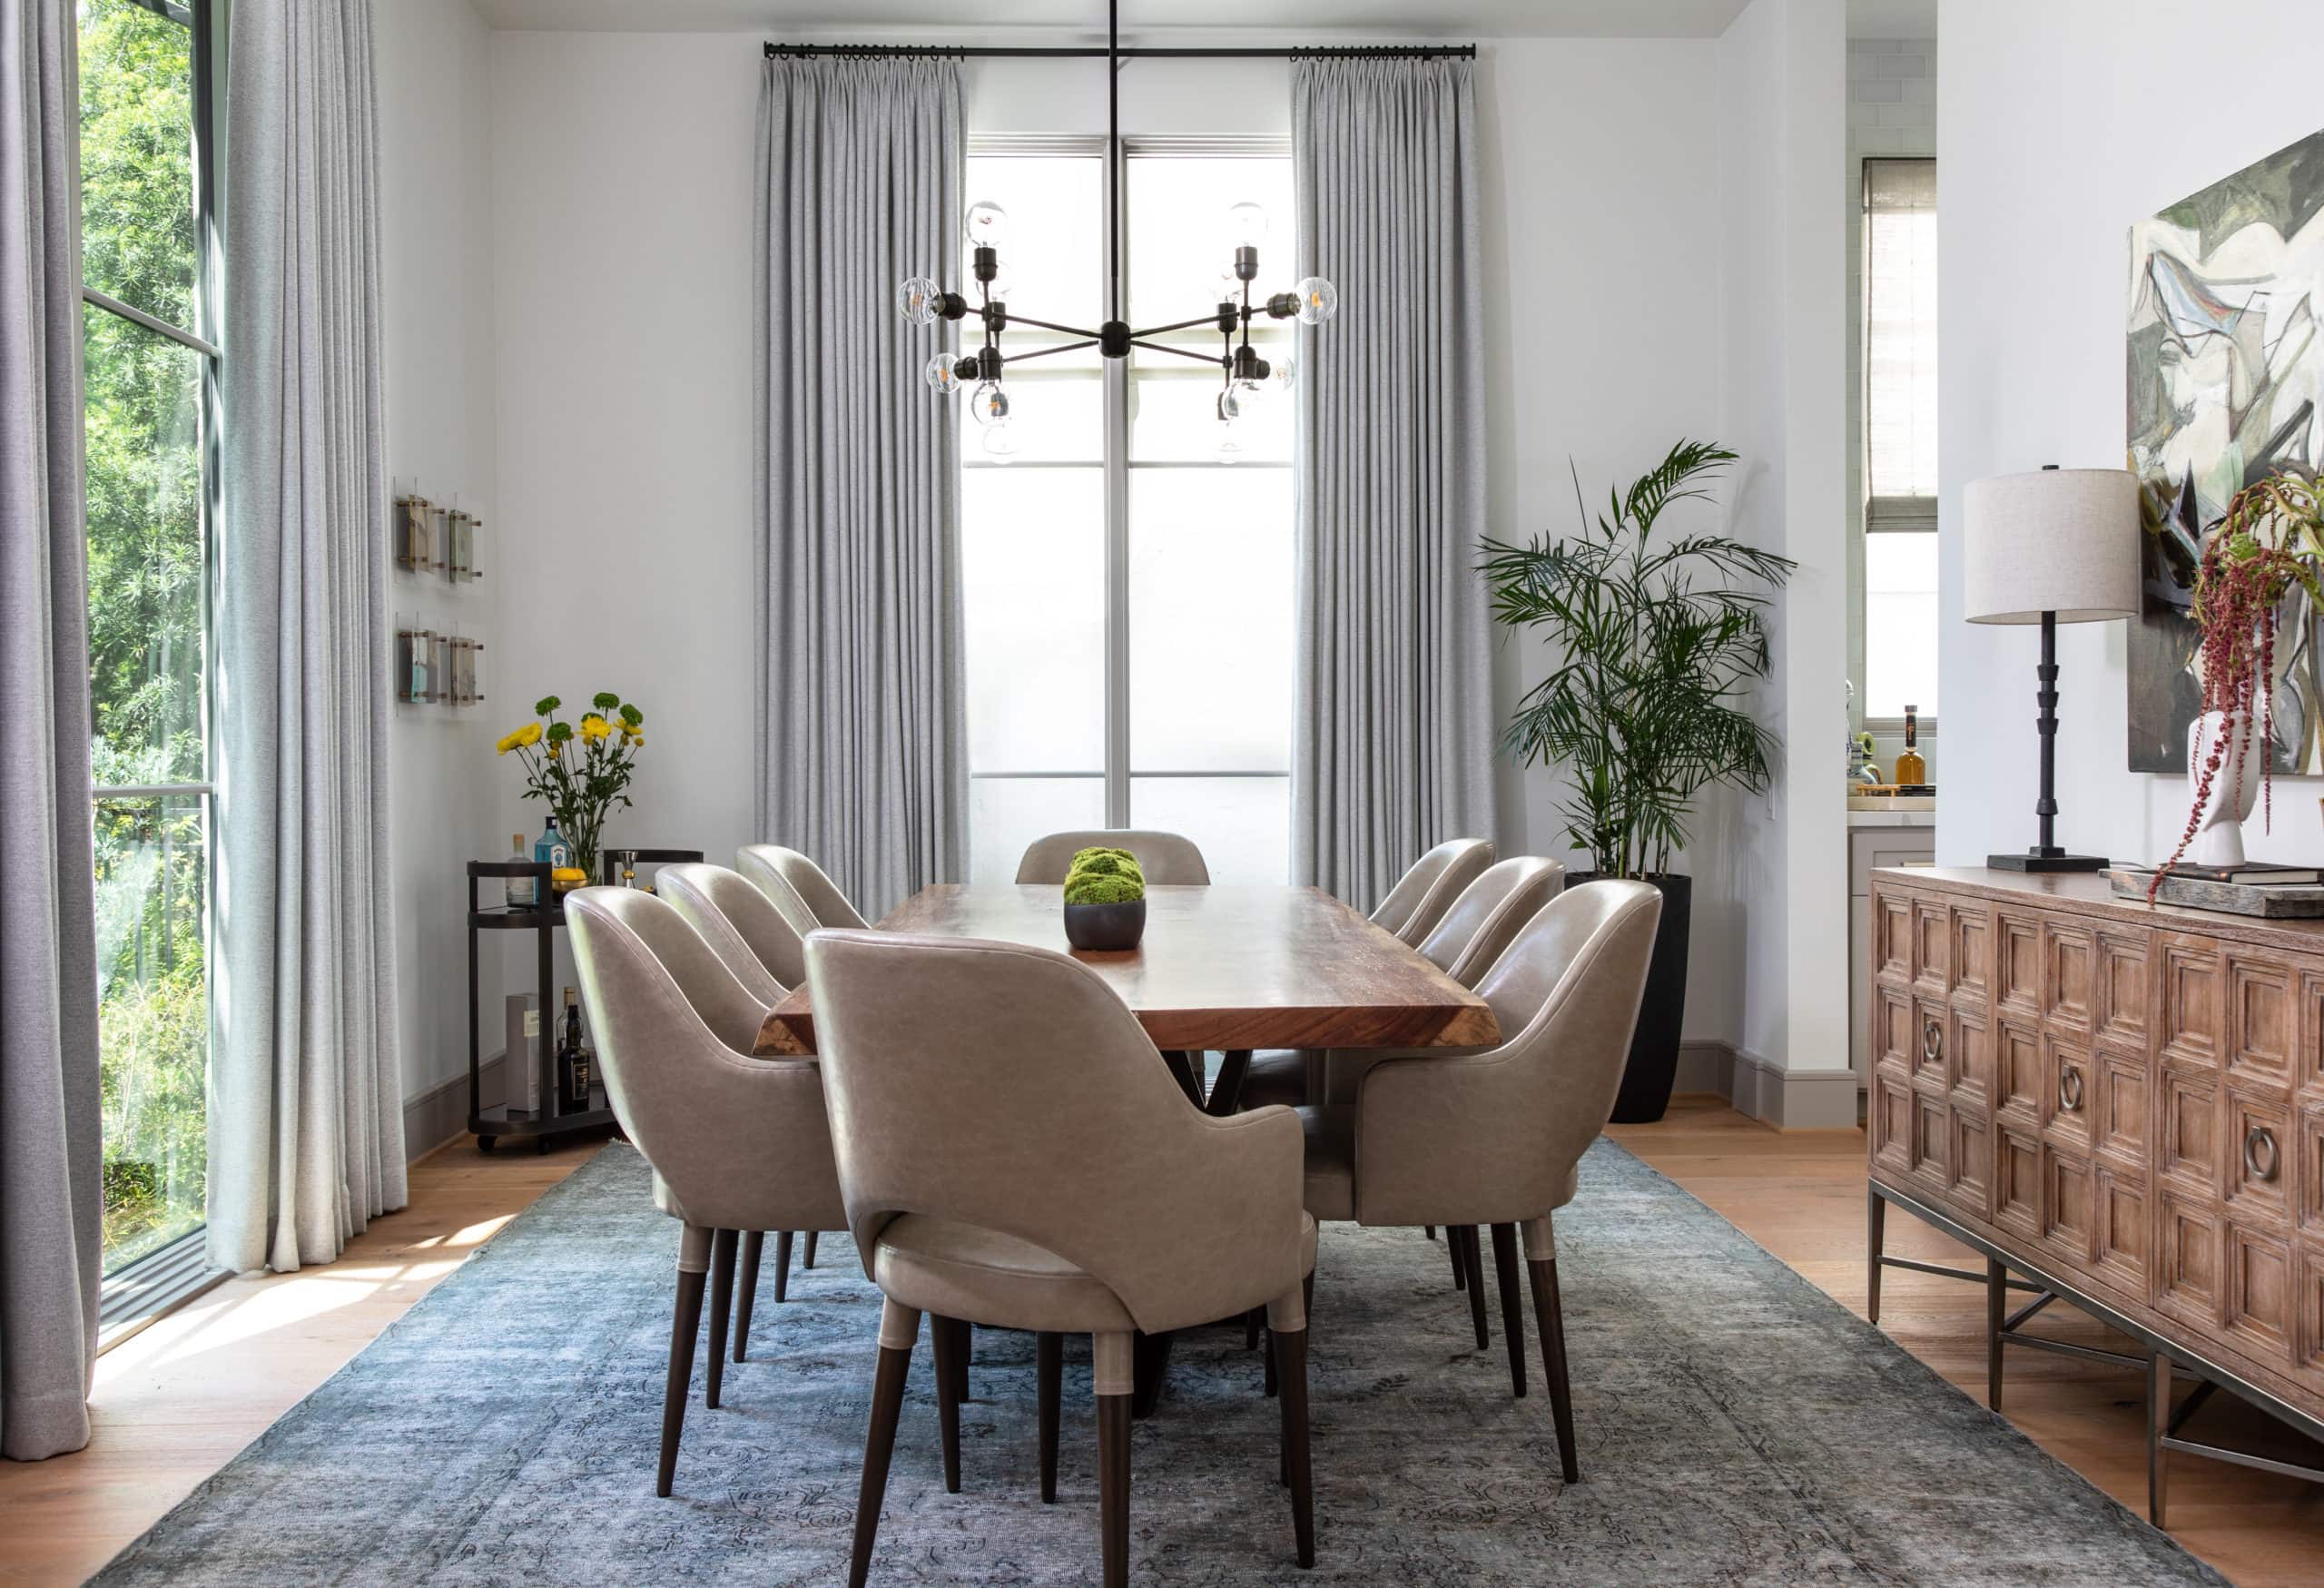 A modern dining room in the Southampton neighborhood of Houston, designed by Laura U